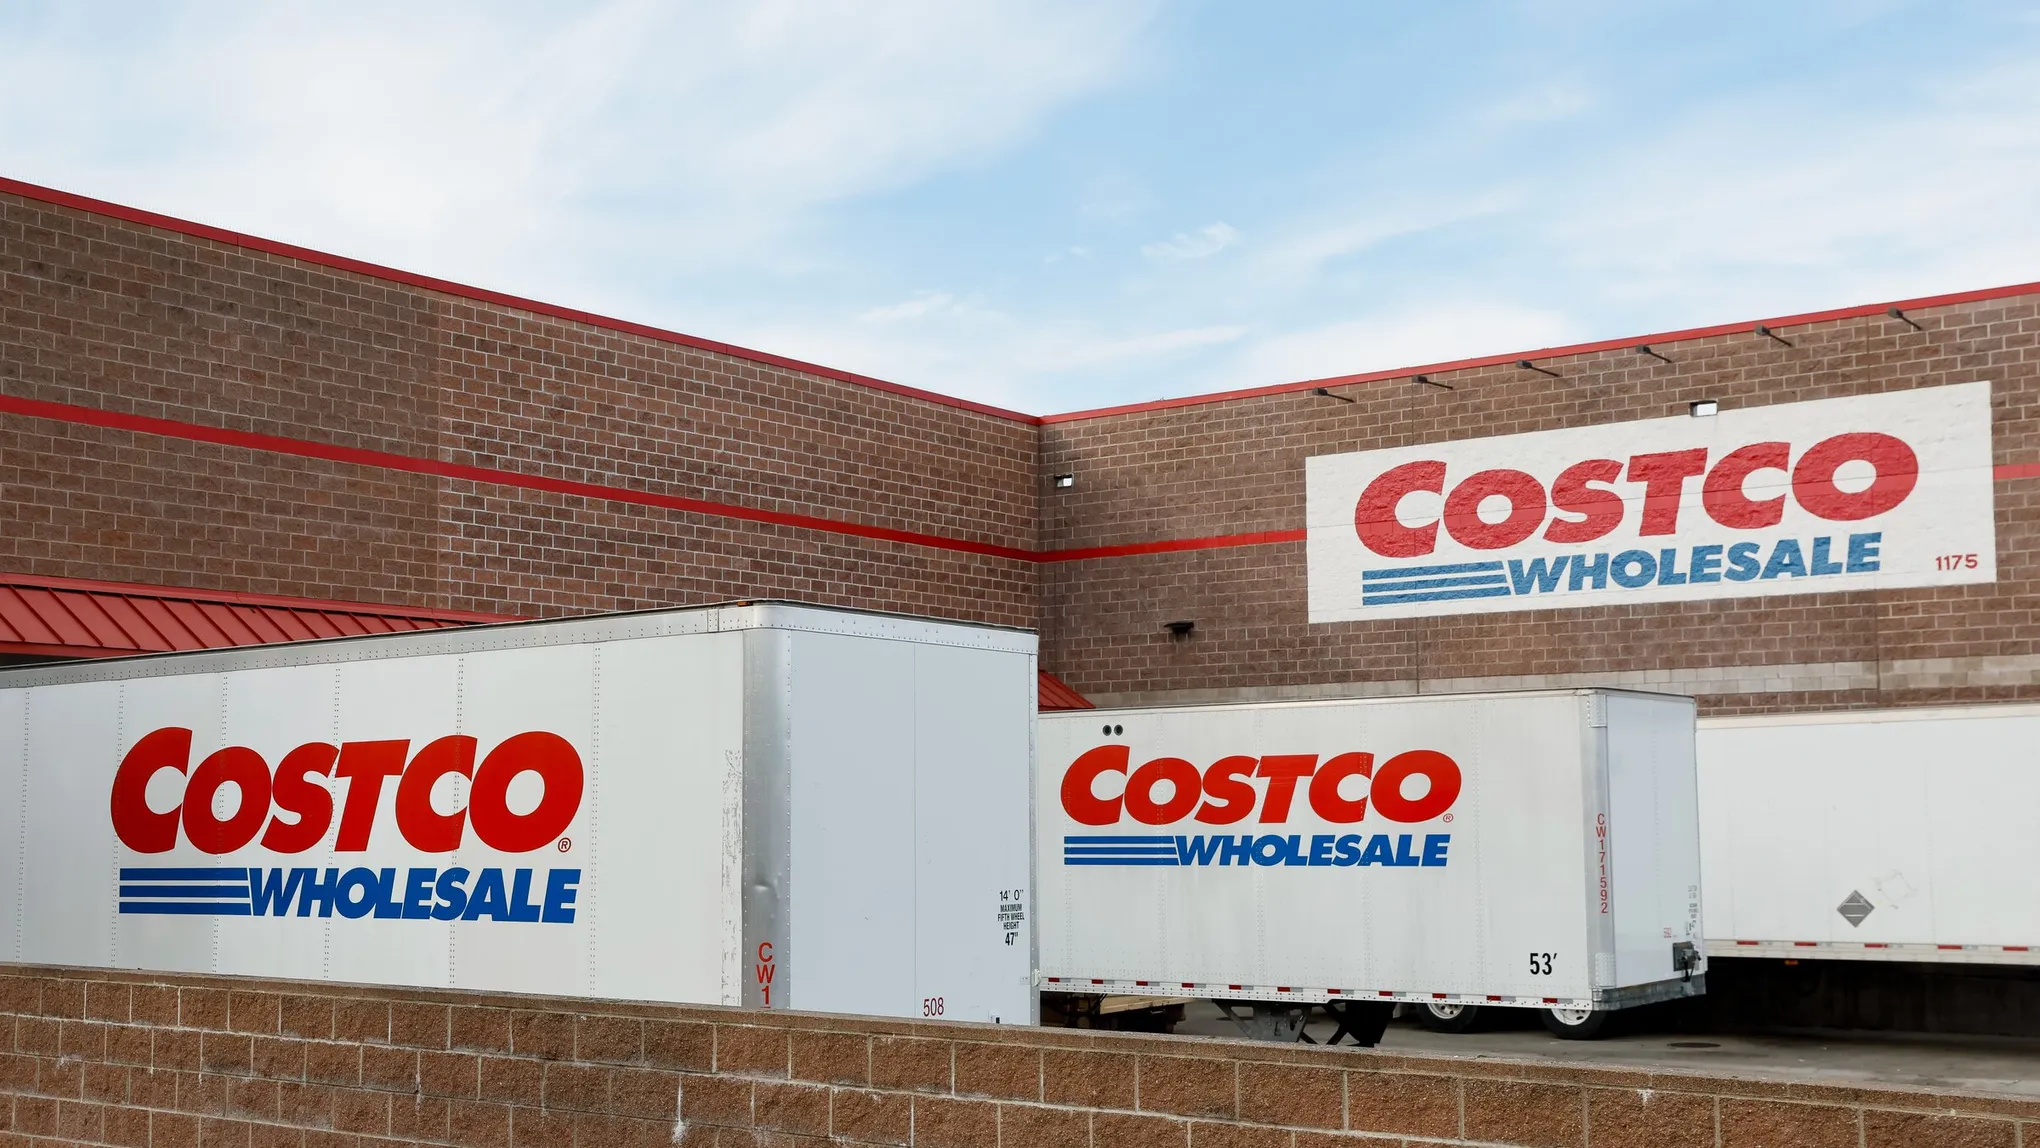 Costco’s Abrupt Price Spike in Gas and Olive Oil Costs Surprised Buyers, but the $1.50 Hot Dog Remained Unaltered